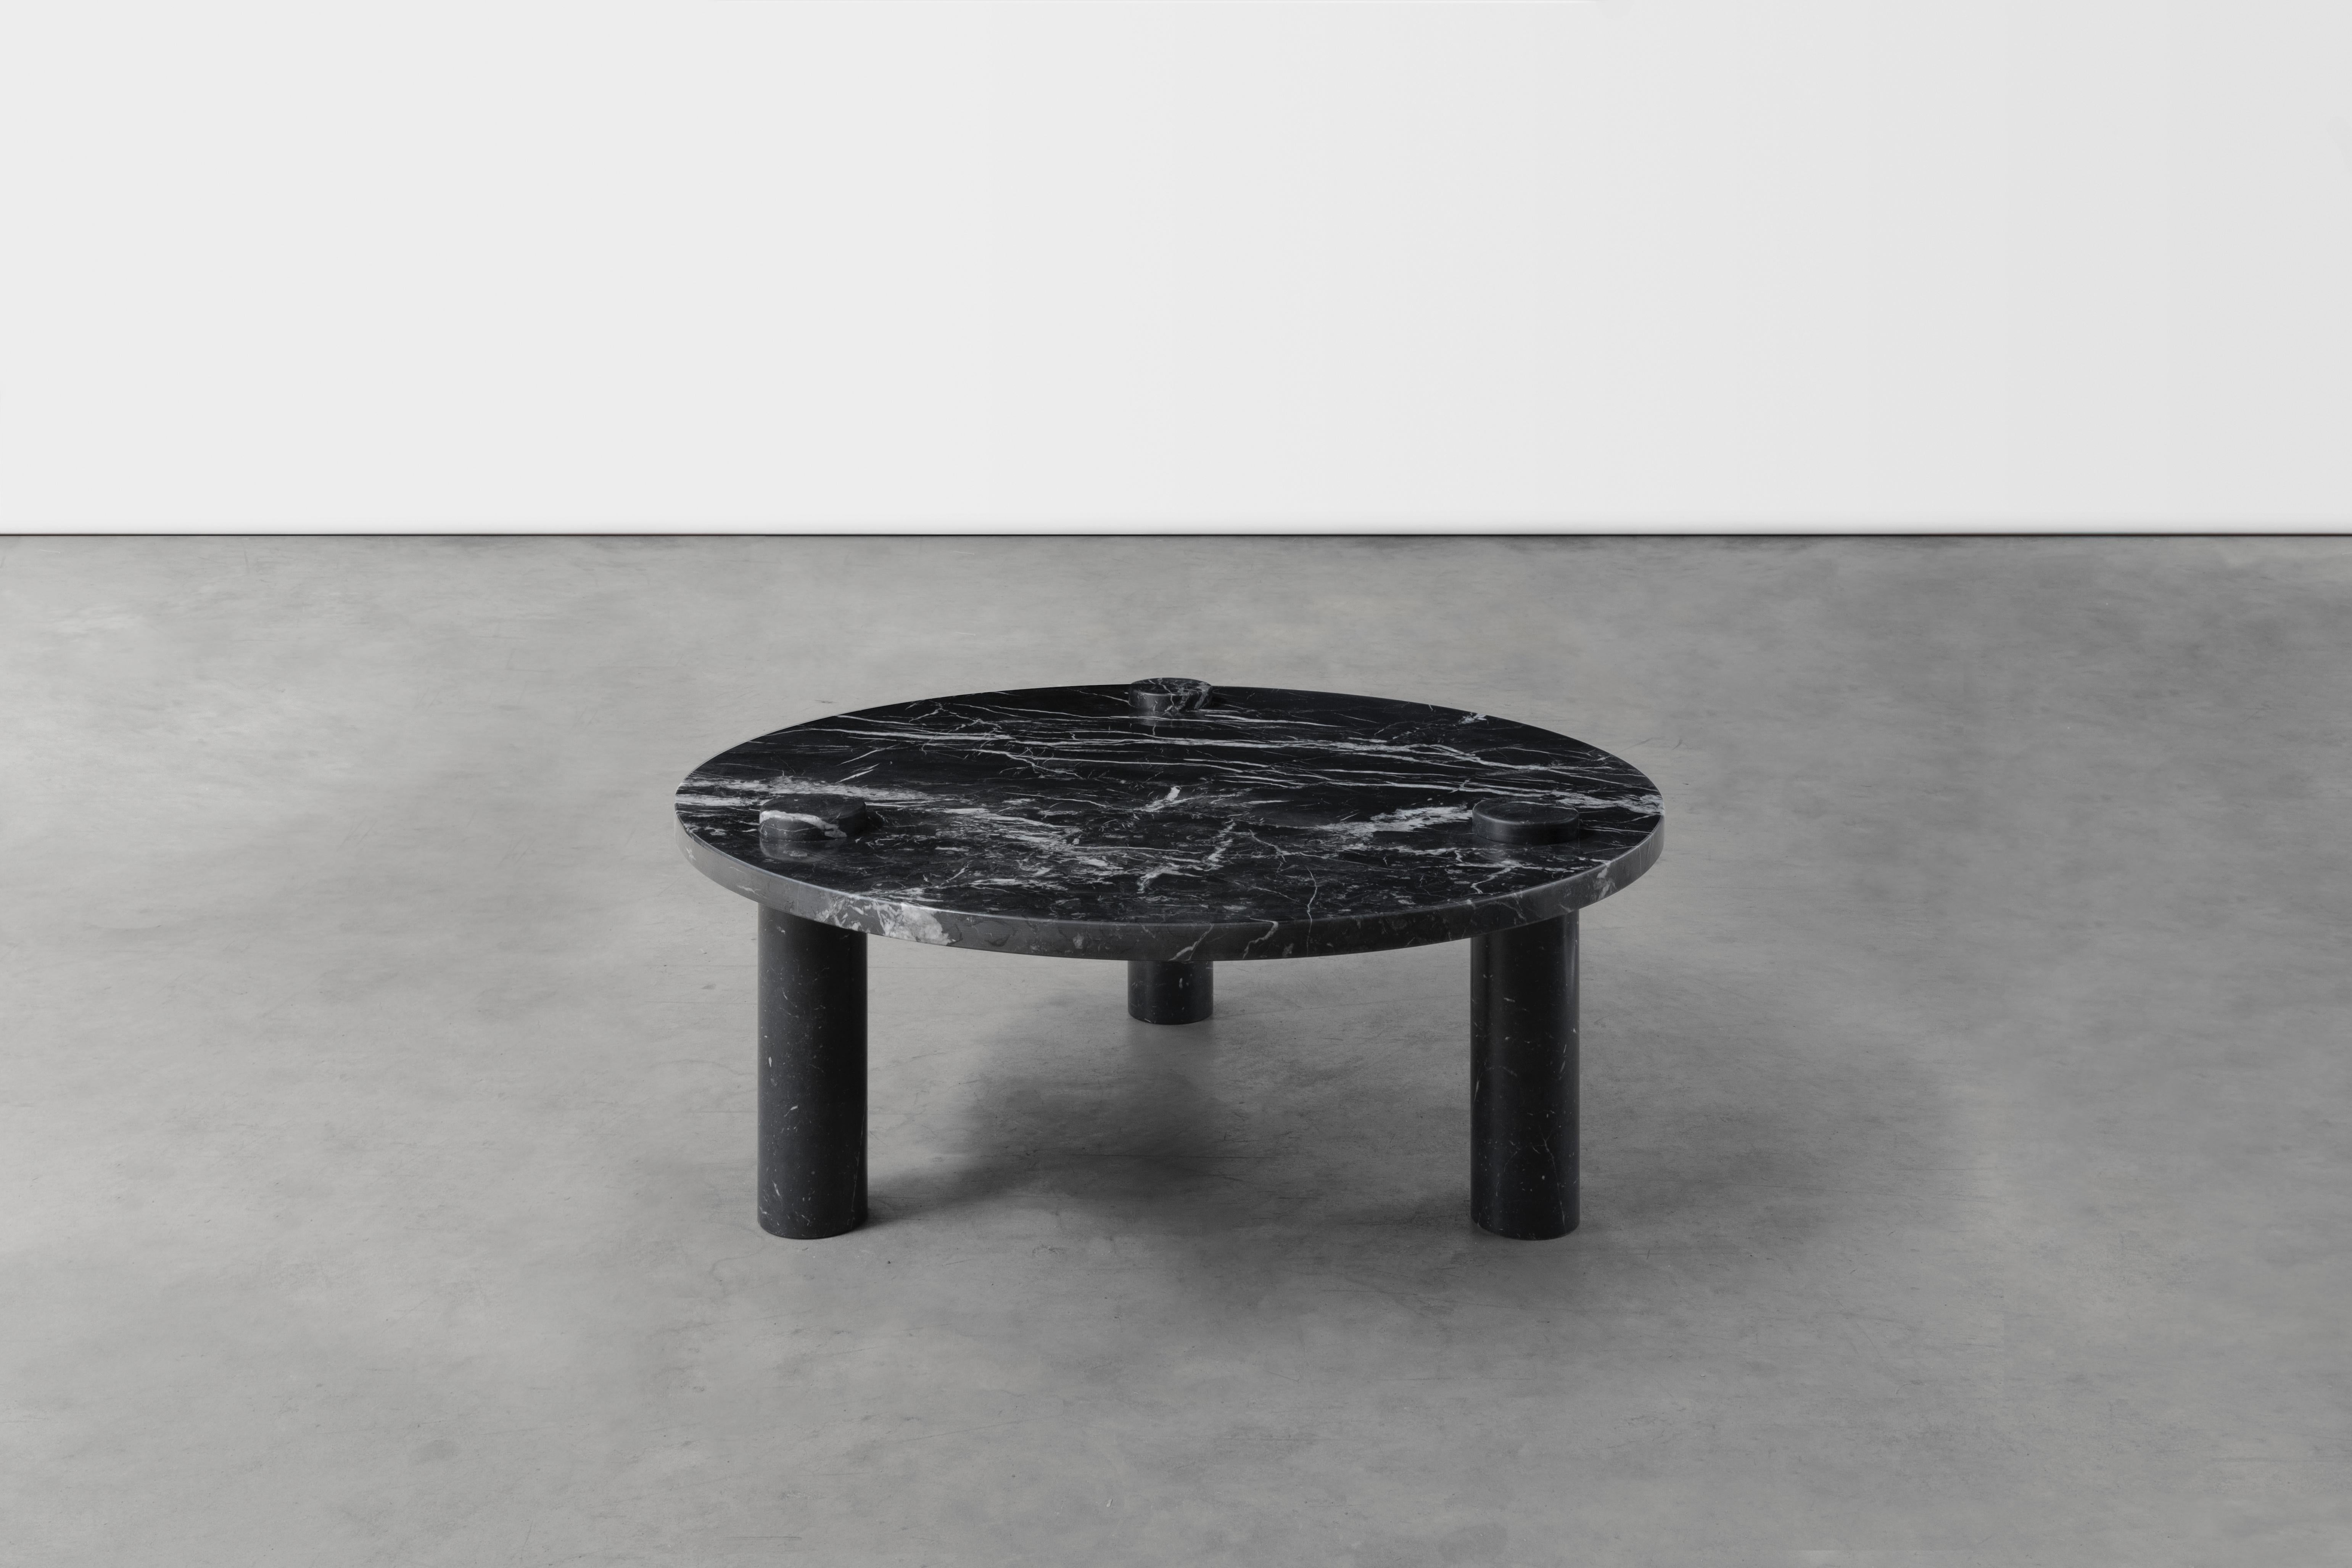 Sienna marble coffee table by Agglomerati
Dimensions: D 90 x H 33 cm
Materials: Nero Maquina marble
Available in other stones.

Sienna coffee table has a minimal architectural form. The circular top appears weightless upon cylindrical legs that